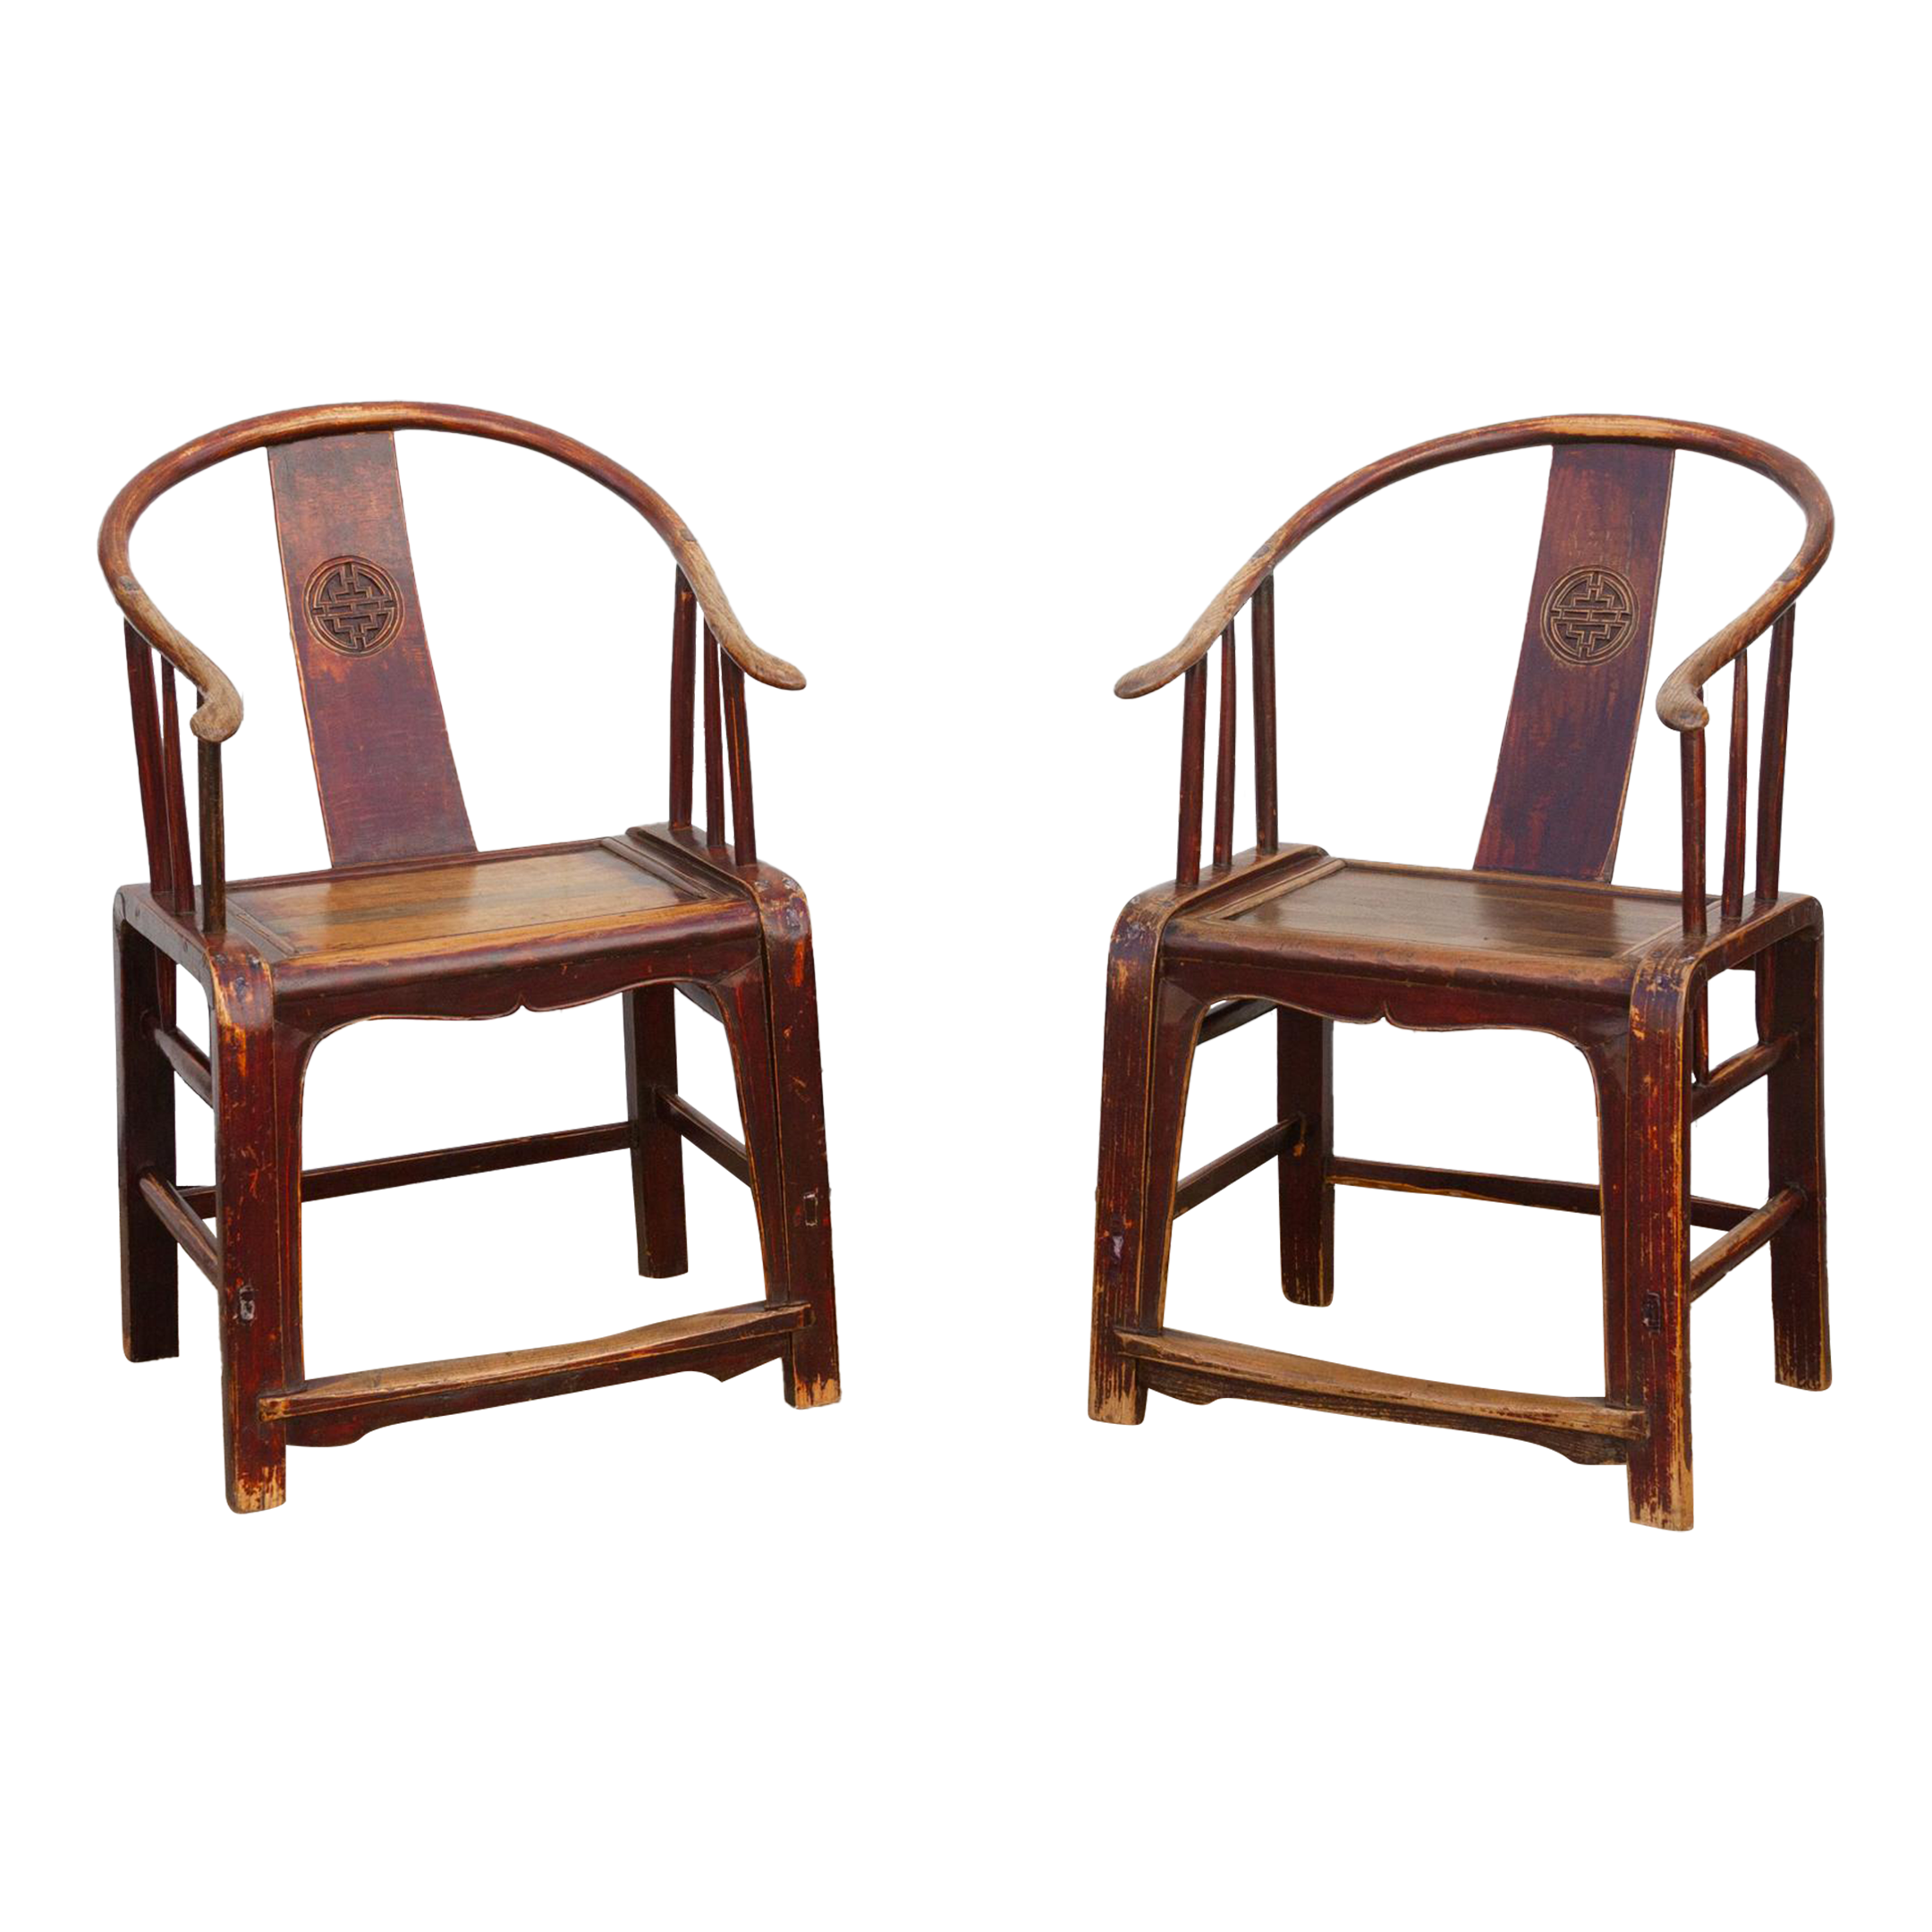 Pair of Antique Brown Horseshoe Chairs~P77689358